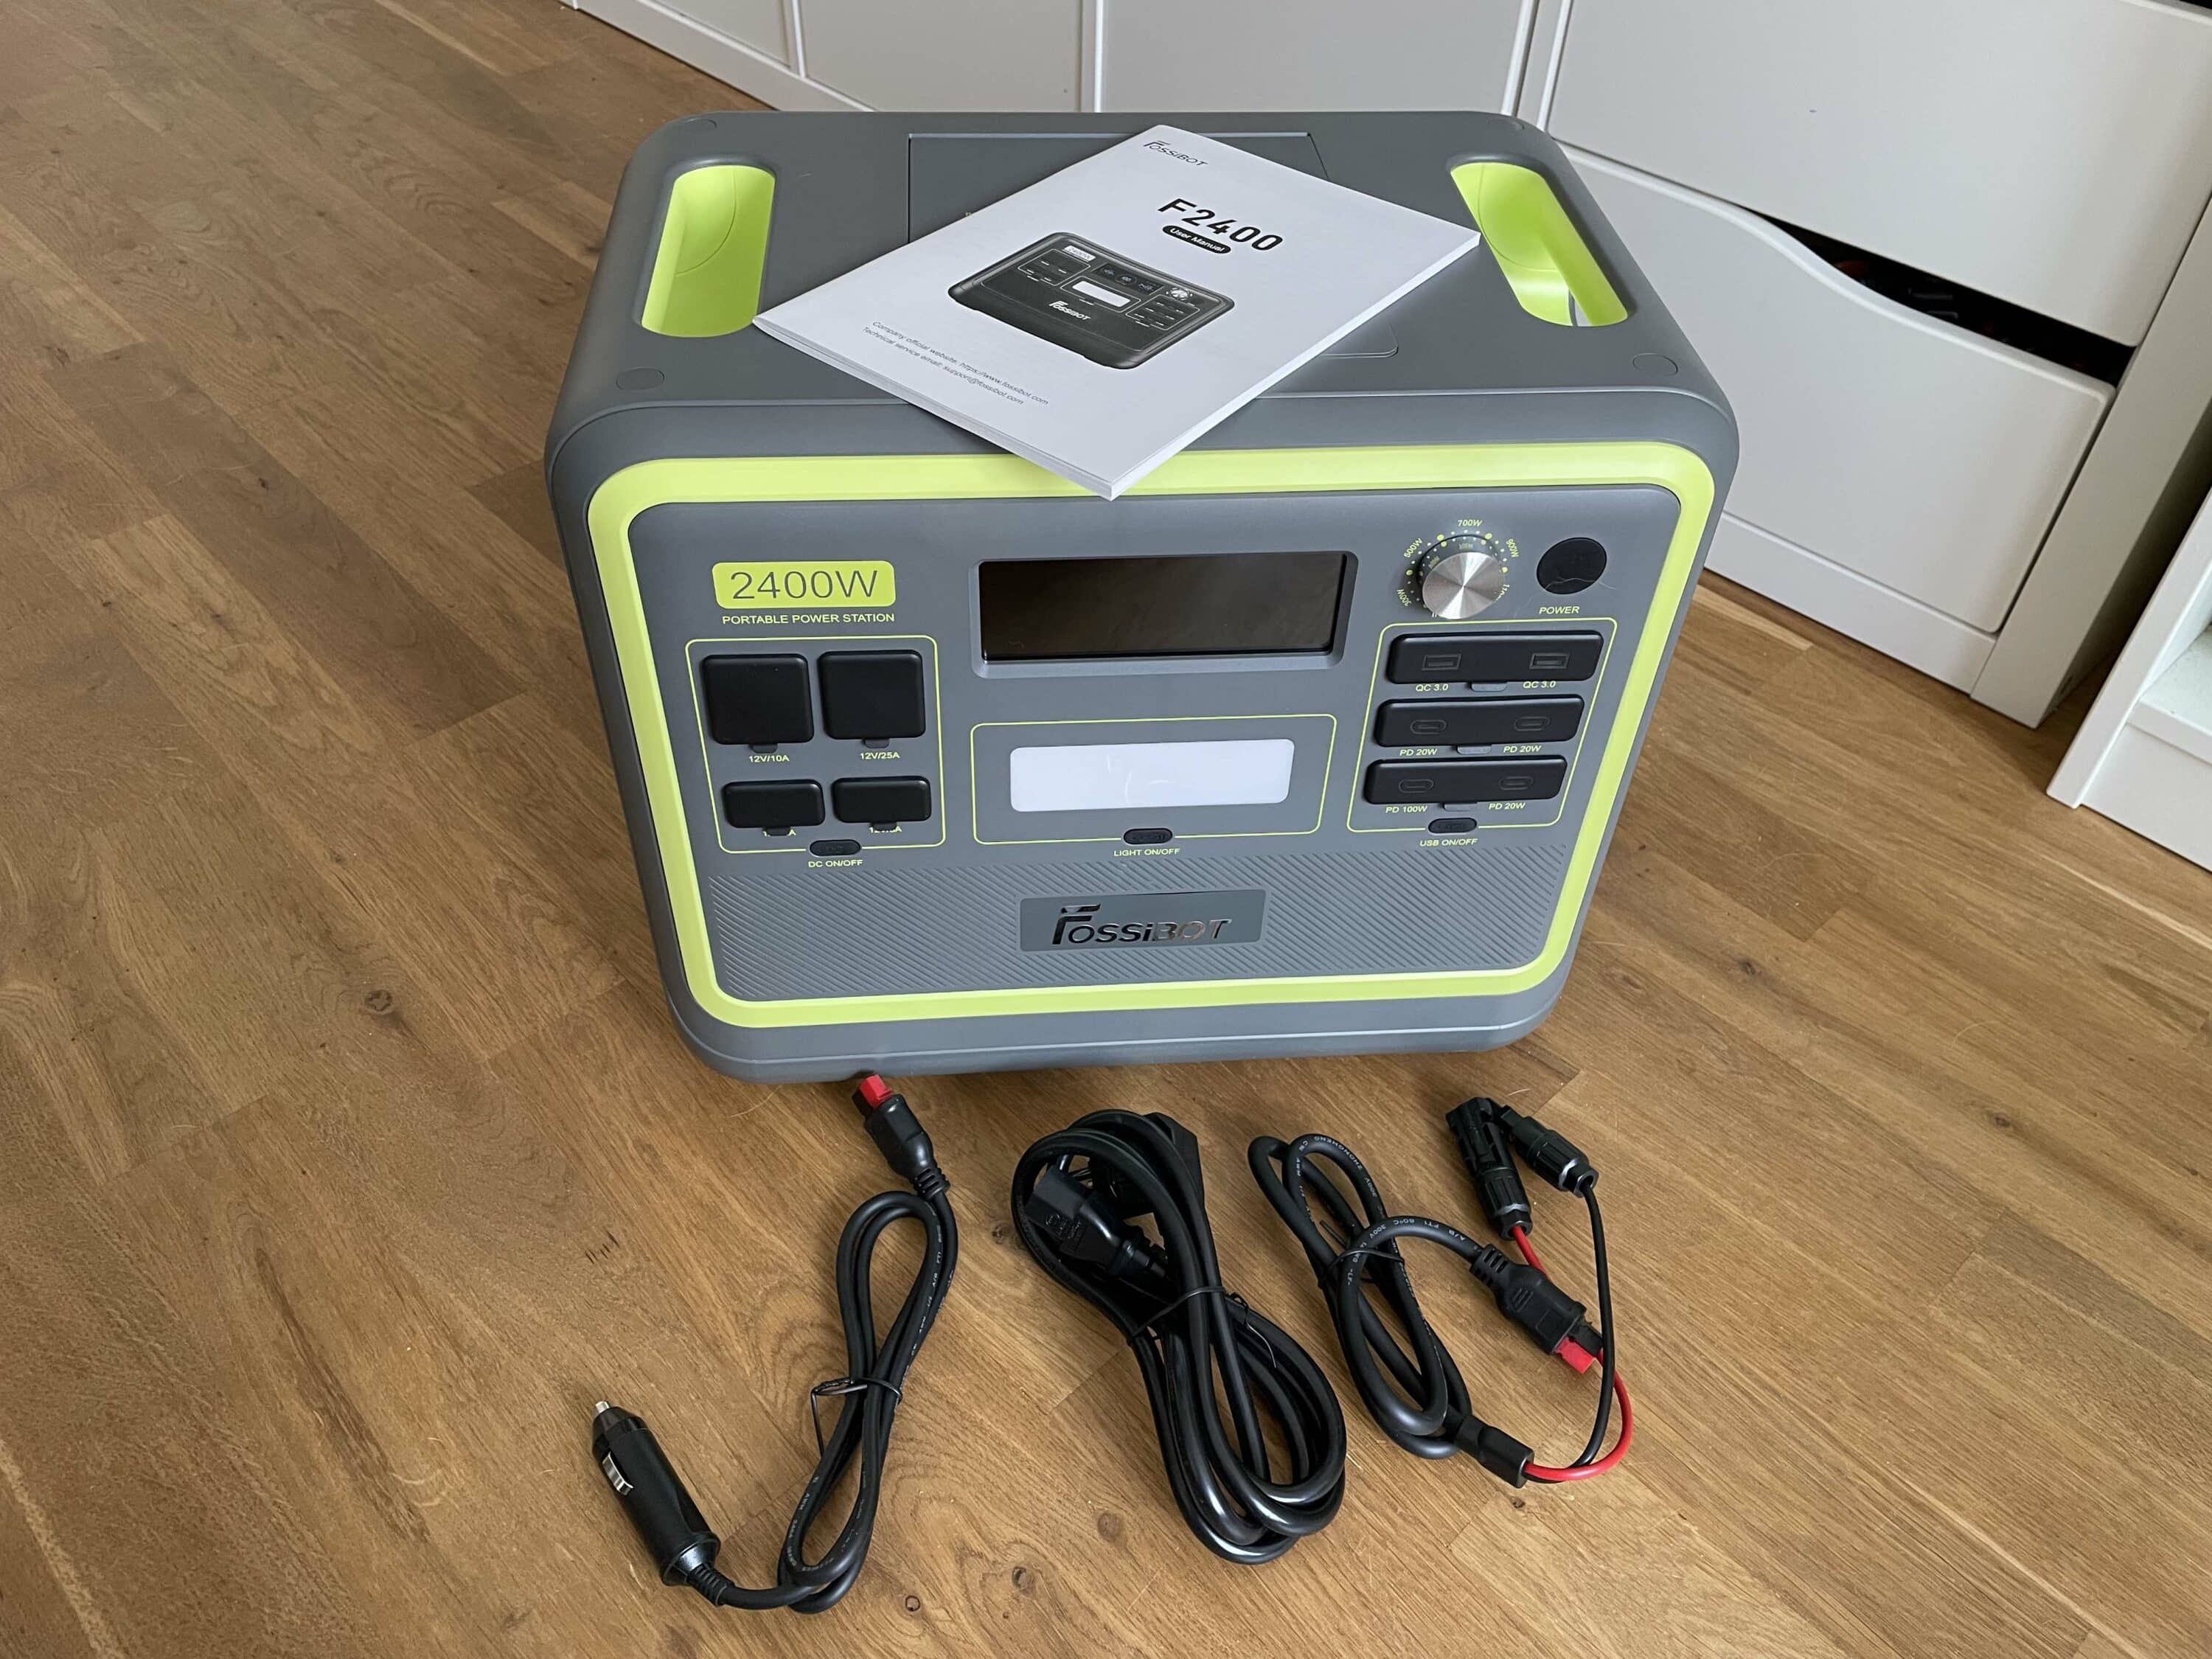 FOSSiBOT F2400 Energizer Portable Power Station 2048Wh LiFePO4 Battery,  2400W Output, 16 Input Ports, Power Adjustment Knob Green From  Romantatech888, $913.87